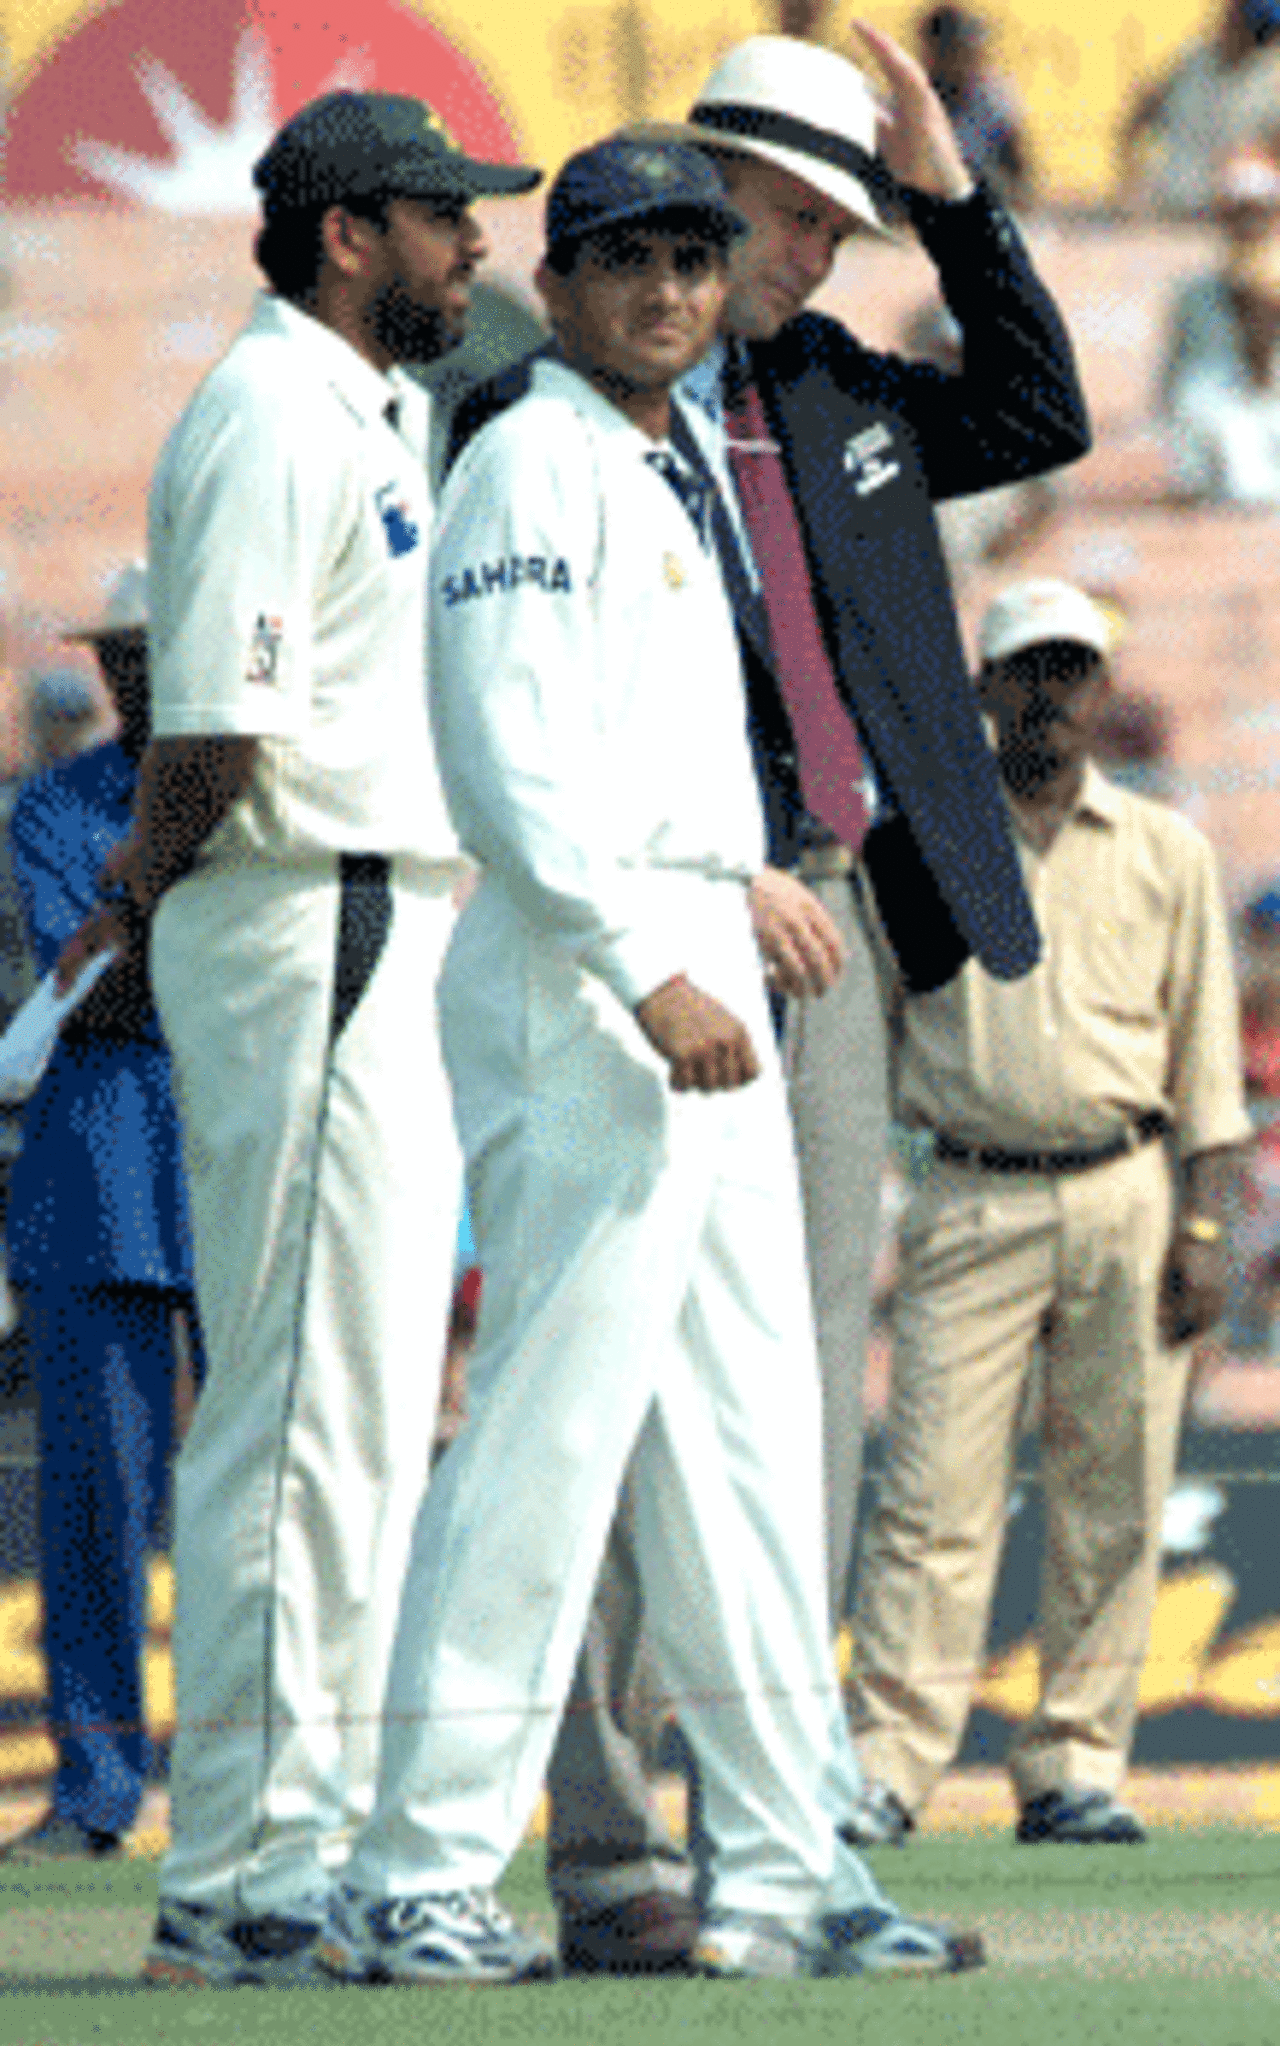 Indian captain Sourav Ganguly and his Pakistan counterpart Inzamam-ul-Haq at the toss before the start of the second test. Overseeing the toss is the former England batsman and ICC Match Referee Chris Broad, 2nd Test: India v Pakistan at Kolkata, 16-20 Mar 2005